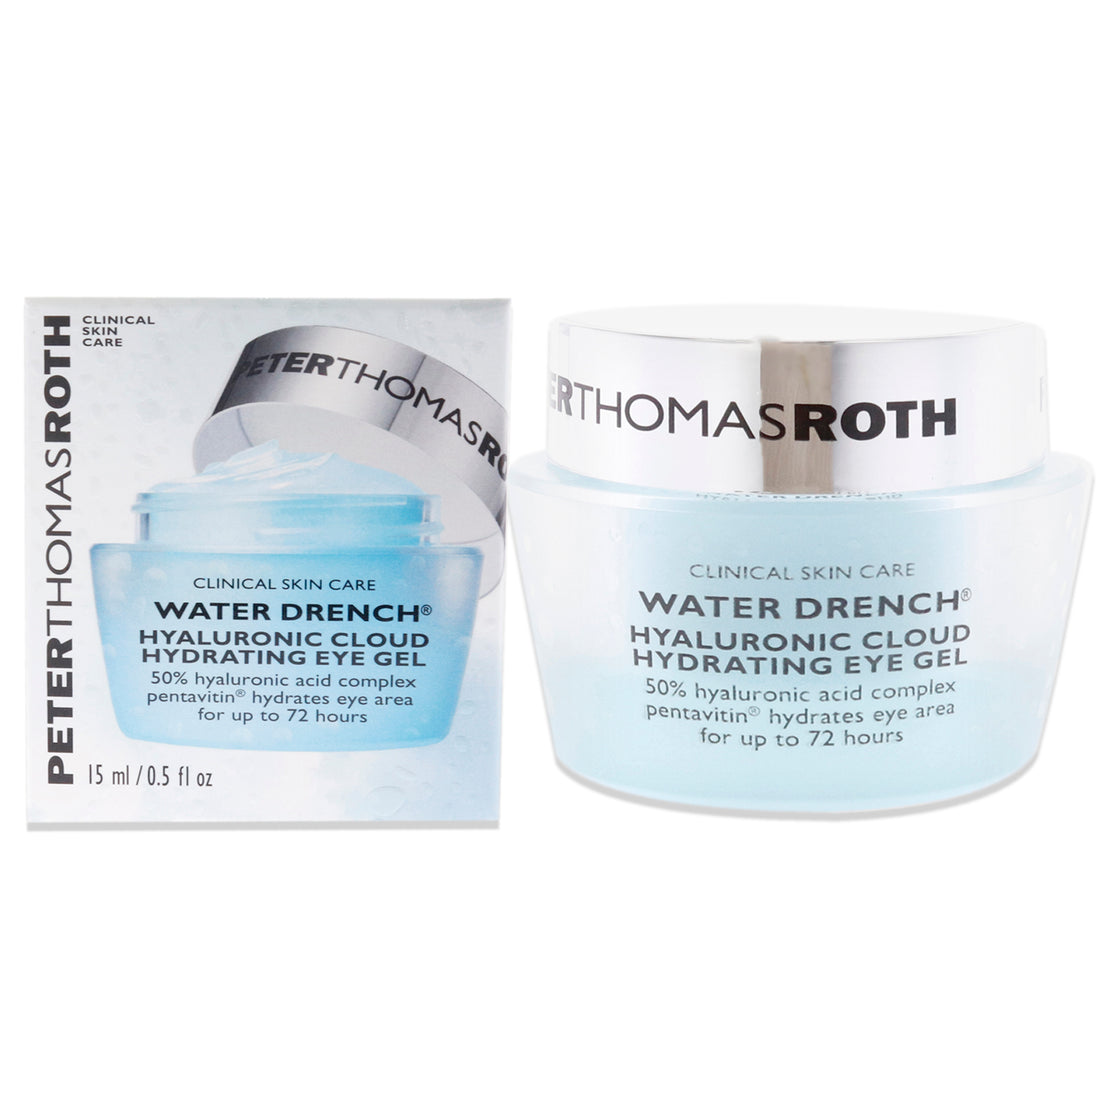 Water Drench Hyaluronic Cloud Hydrating Eye Gel by Peter Thomas Roth for Unisex - 0.5 oz Gel